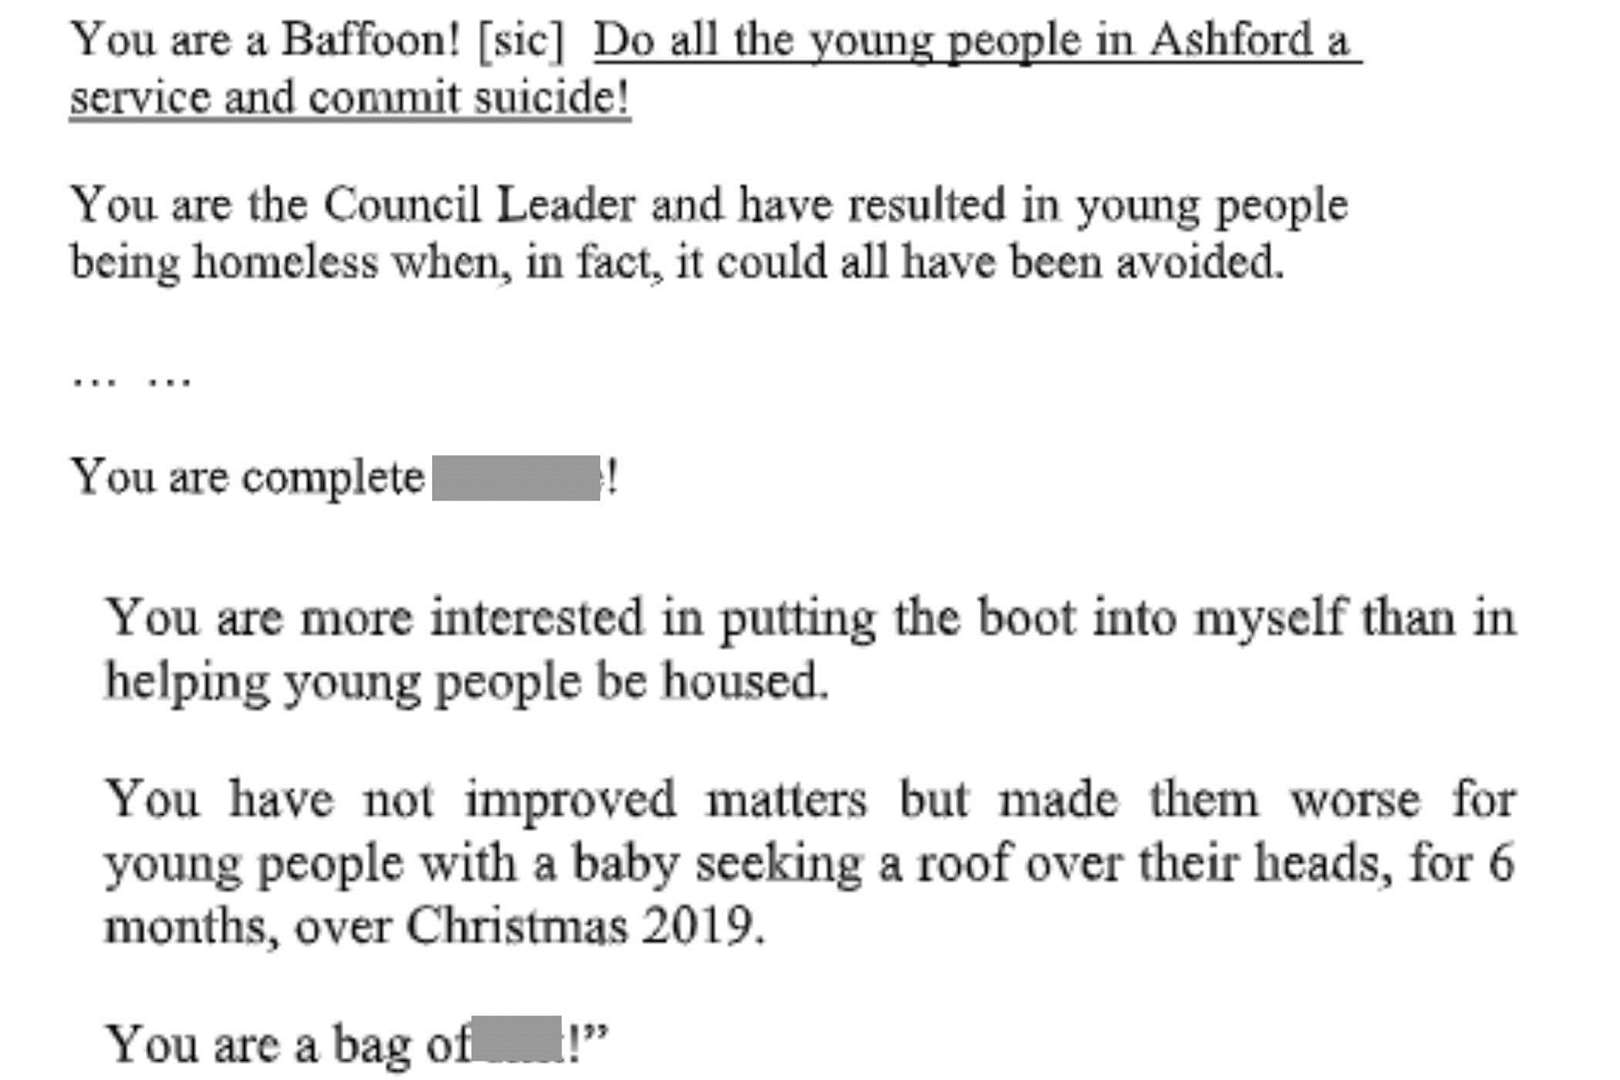 Excerpts from a letter Mr Wilson wrote to Cllr Clarkson's home address